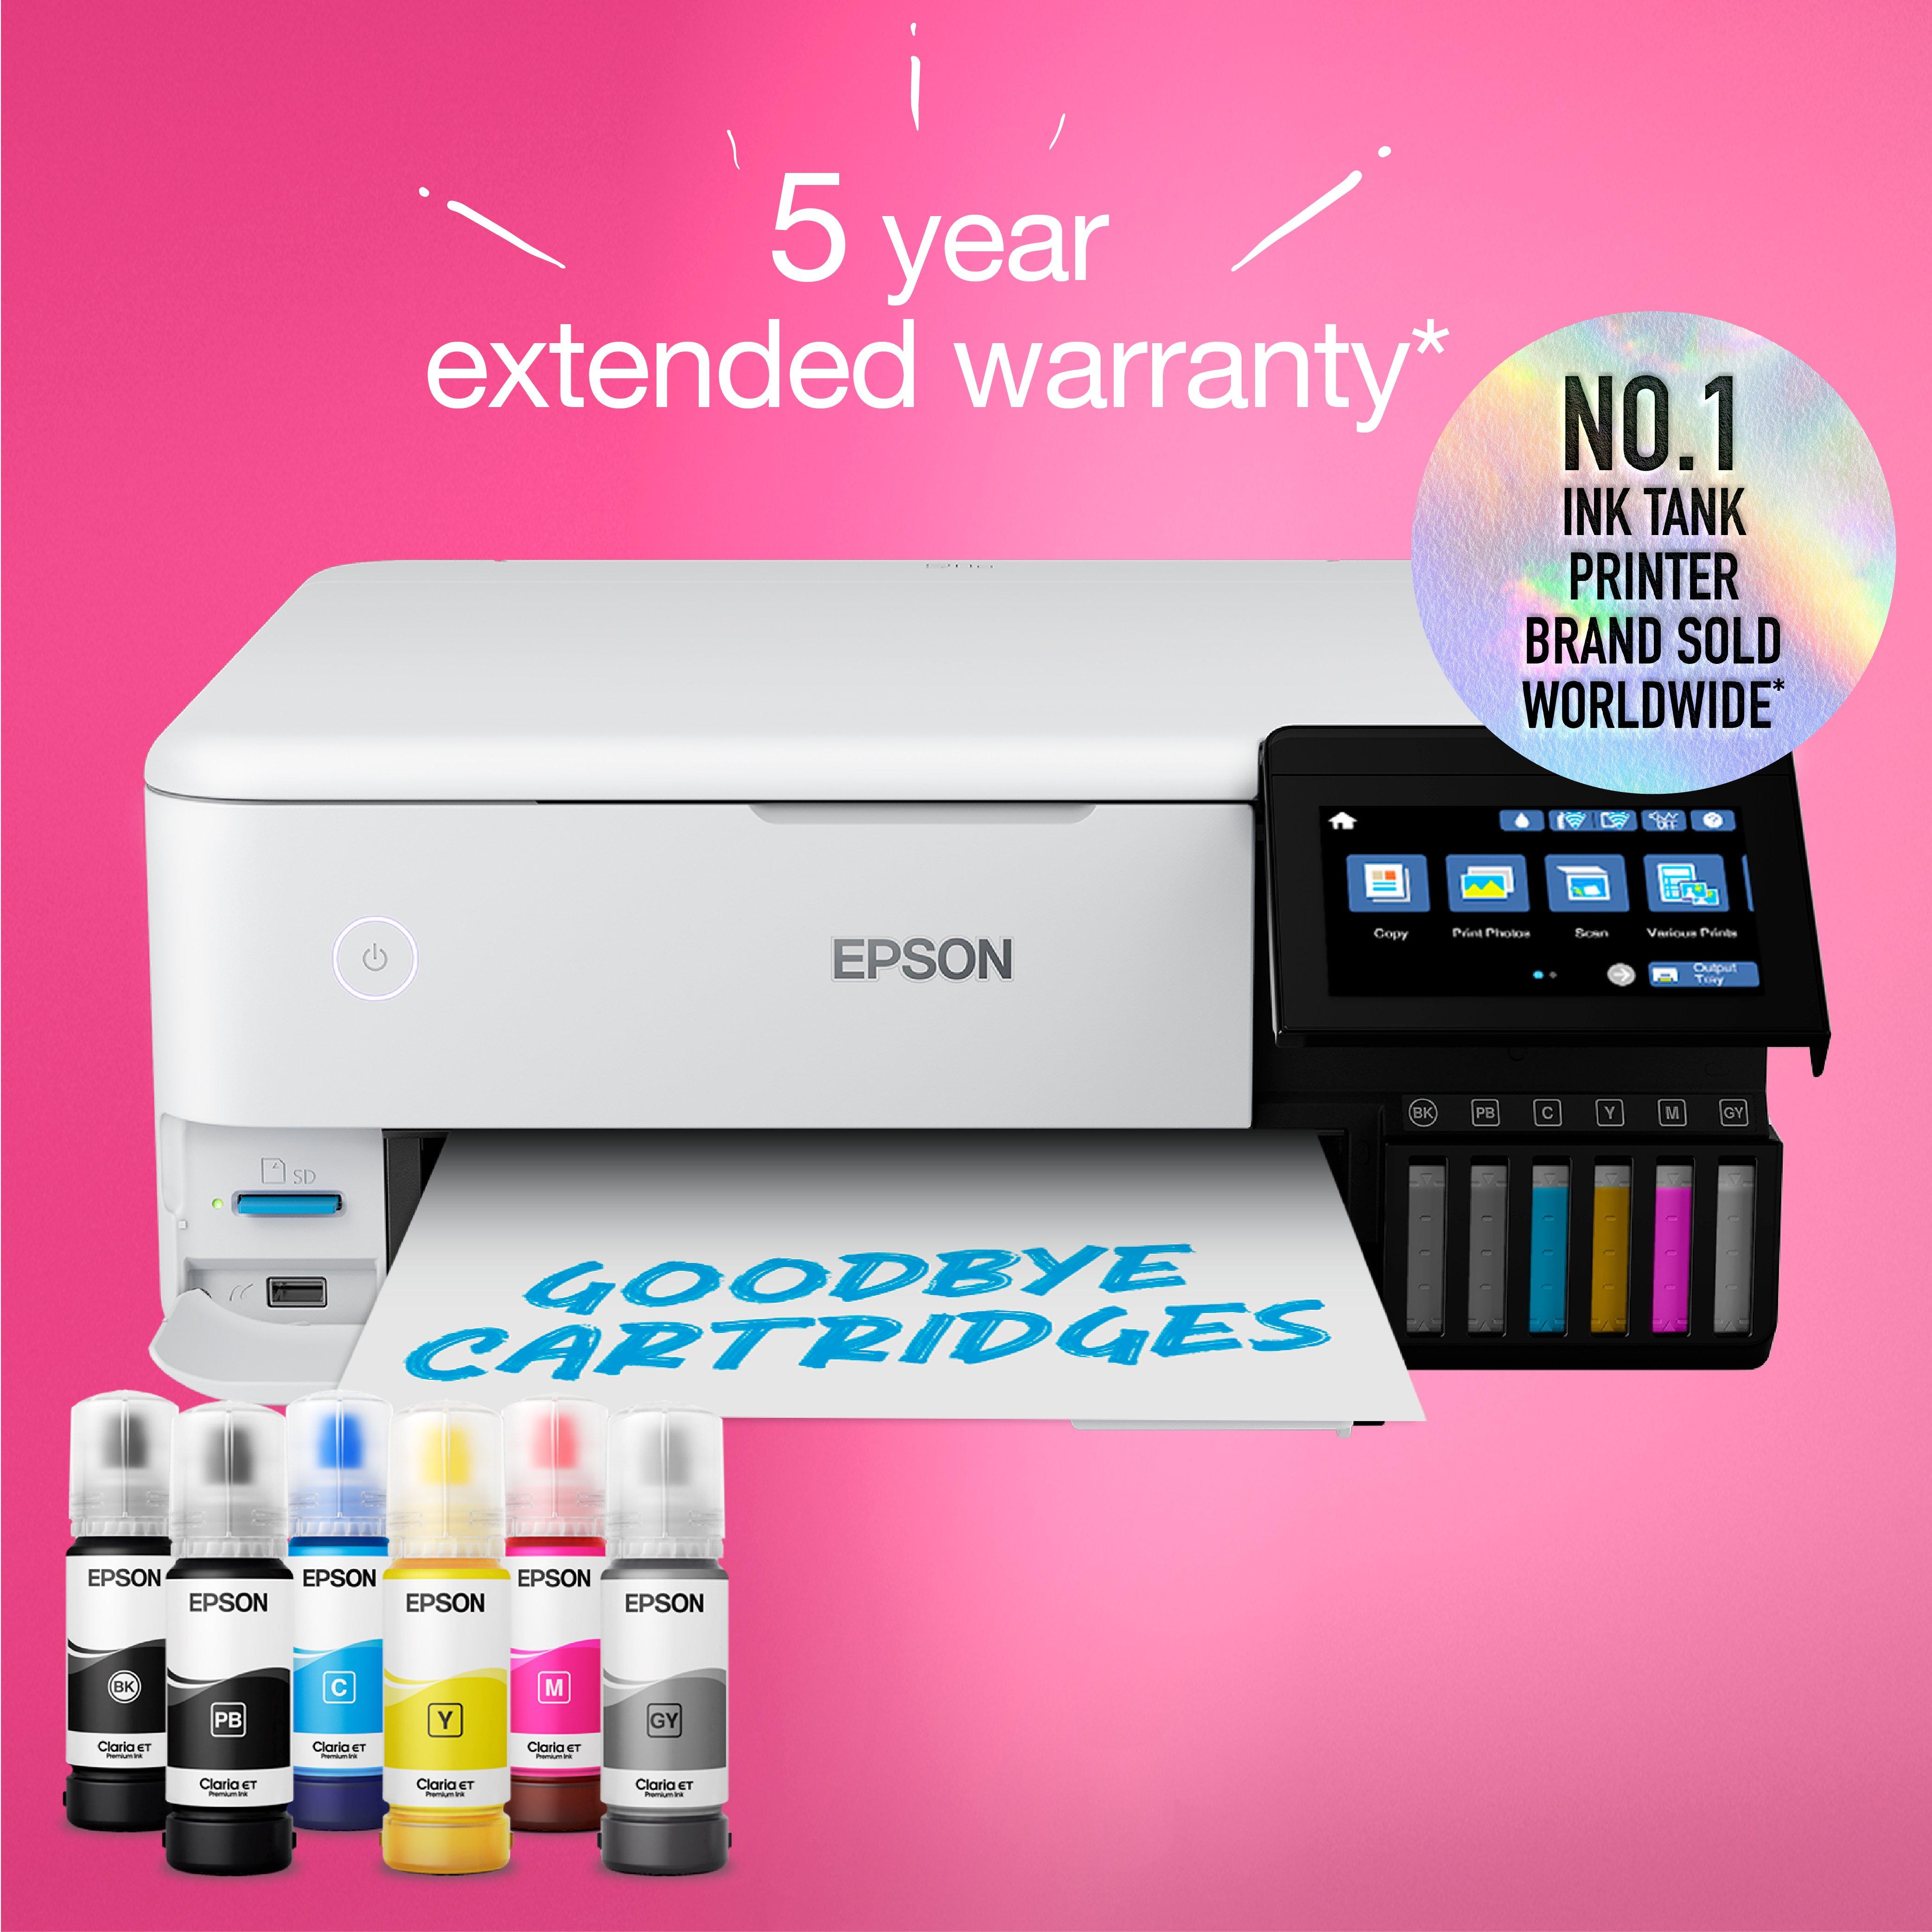 Epson Ultra Premium Photo Paper Glossy 4x6 Size 60 Sheets - Epson  SureColor & HP Printers - Dye Sub, DTG, Sign, Photo & Giclee